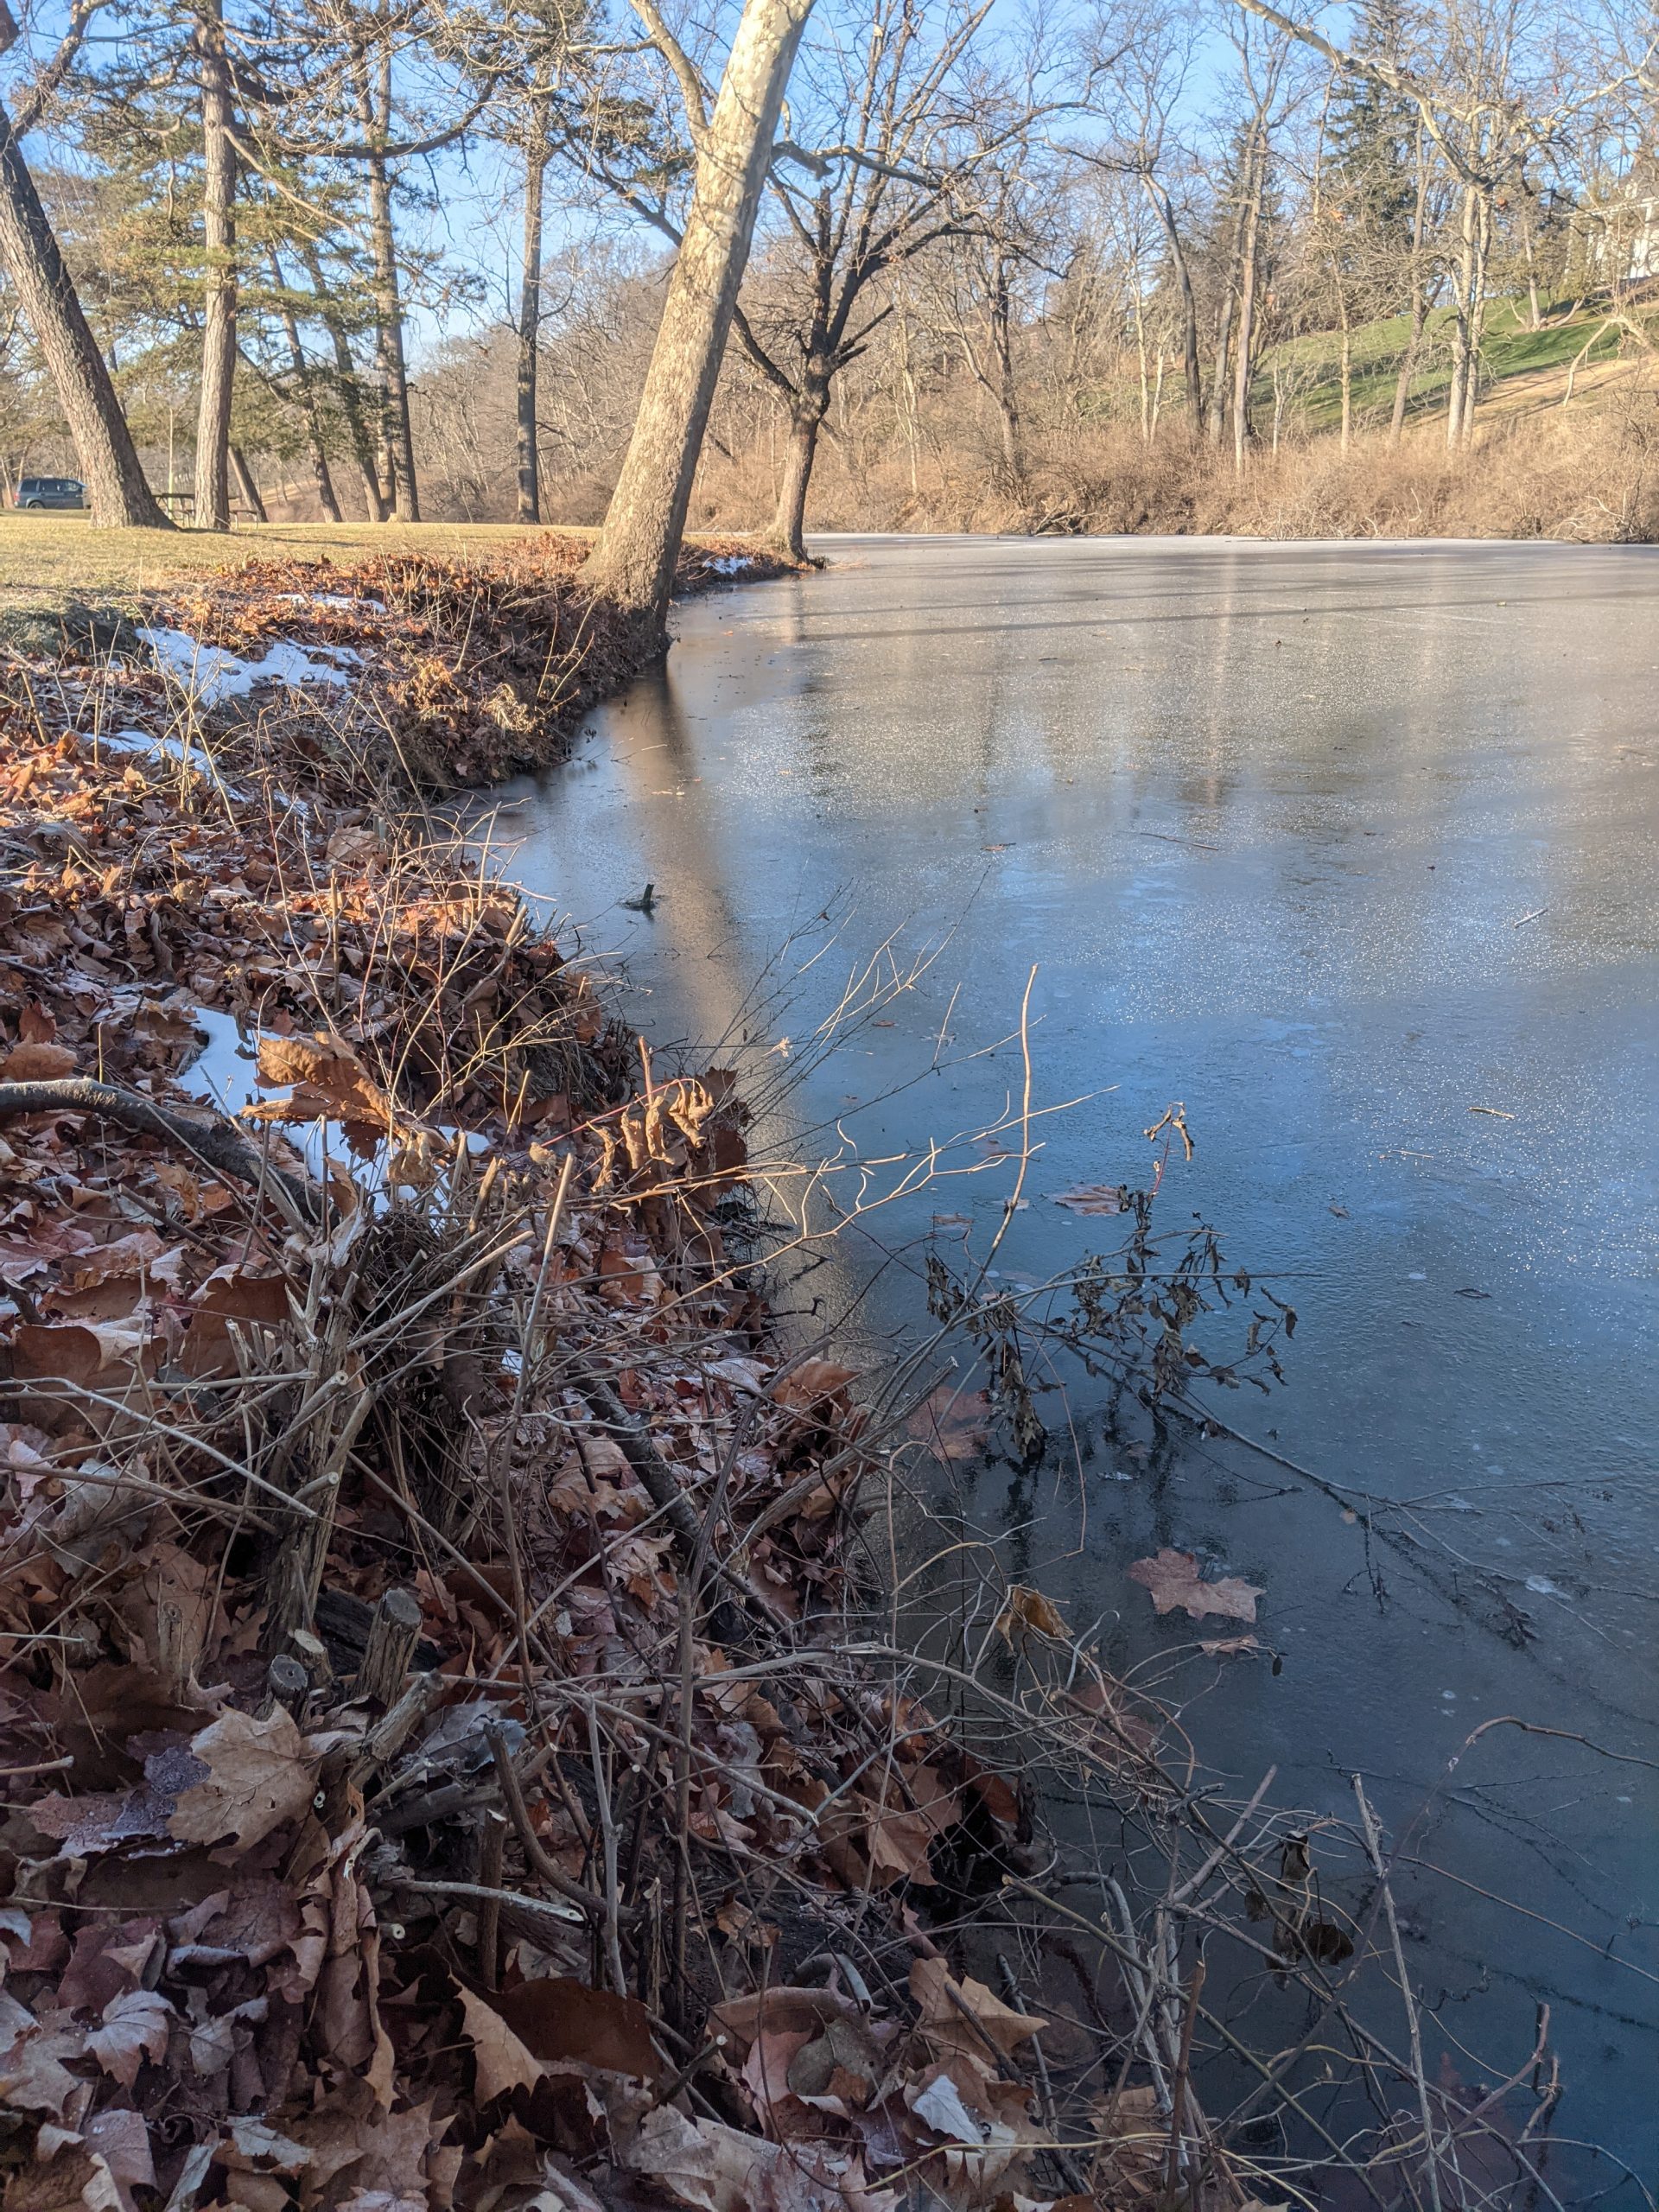 Maumee river Report- 30 December 2020